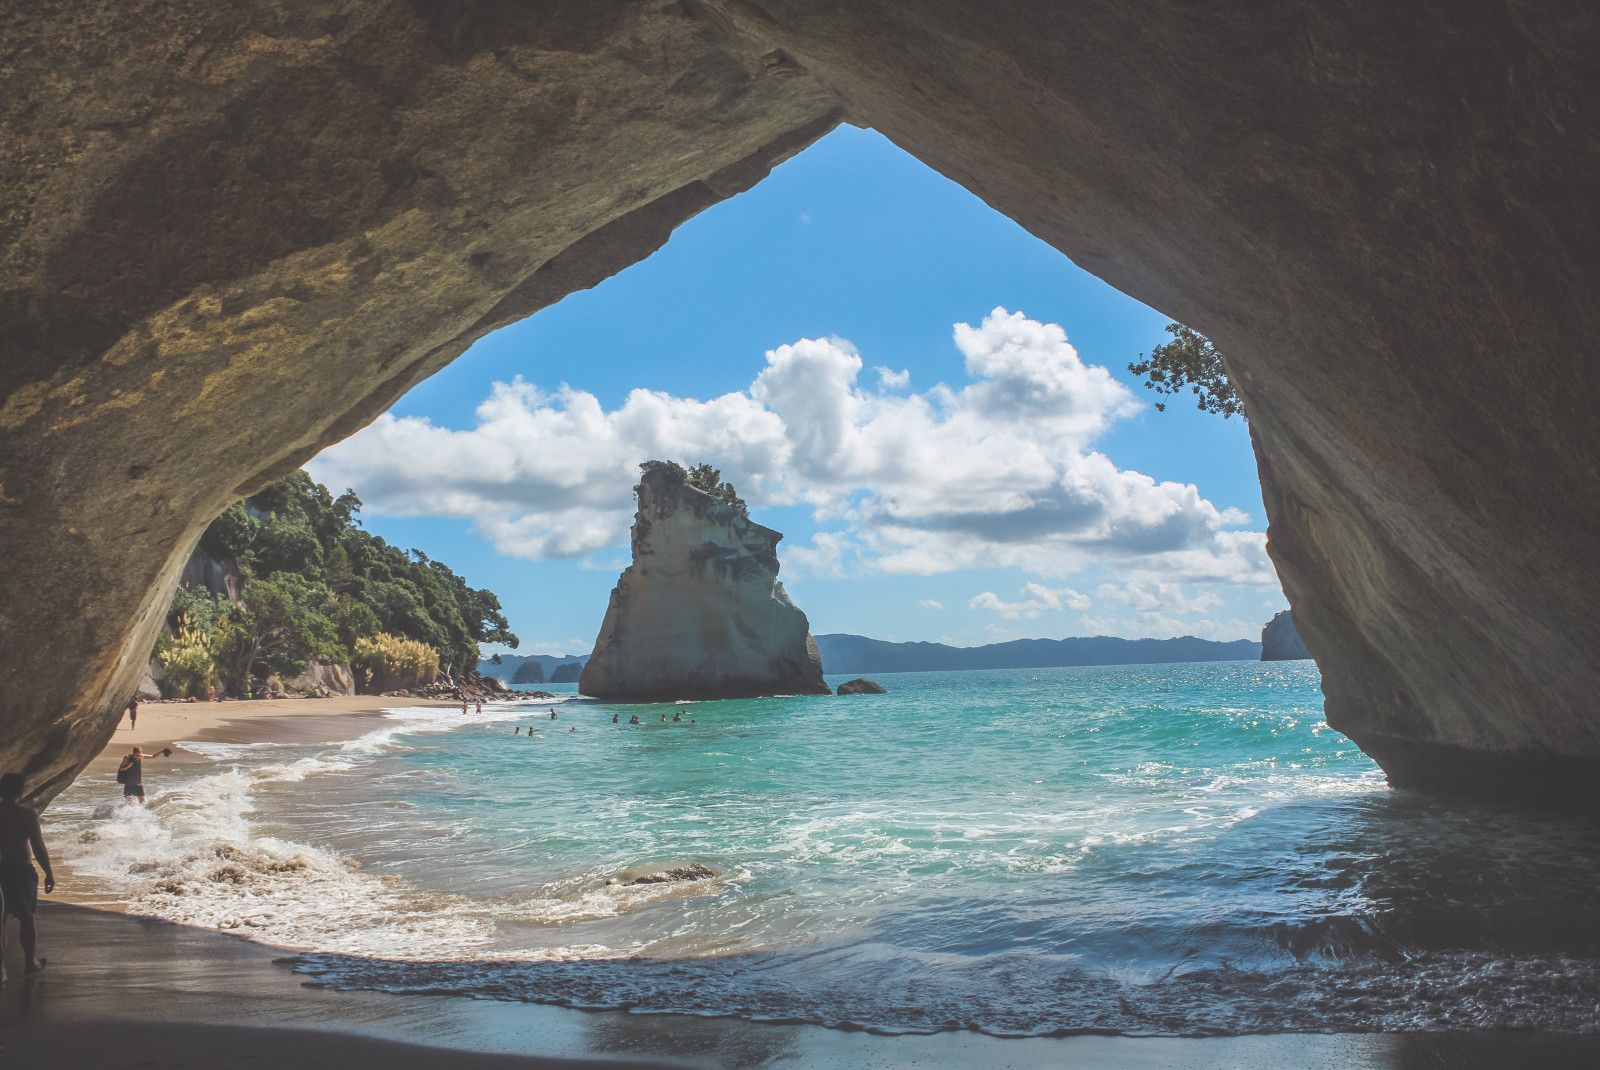 Cathedral Cove outside of Auckland, New Zealand with large rock formations in blue waters and a dark cave.